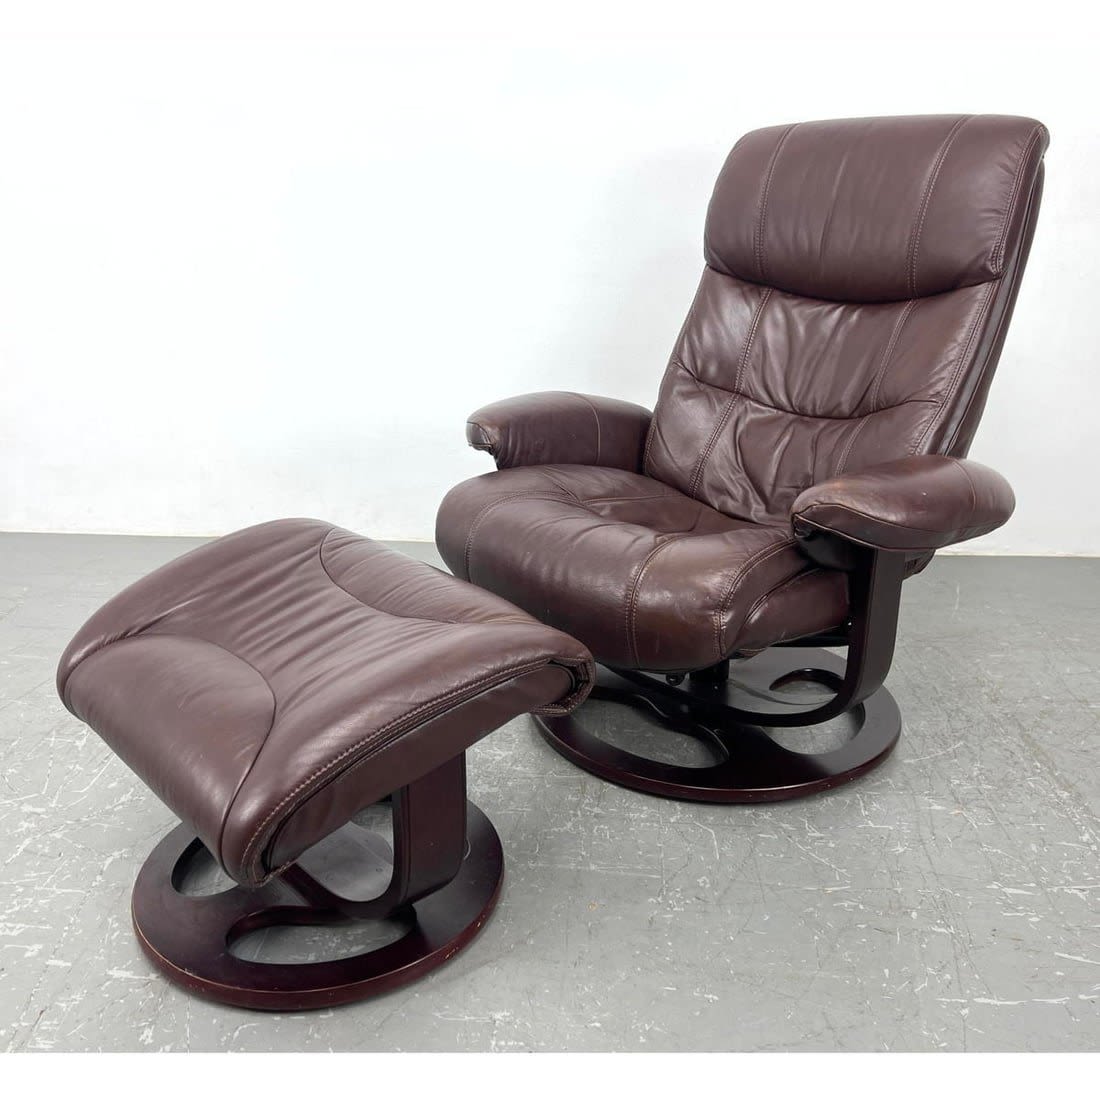 LANE Leather Lounge Chair and Ottoman.